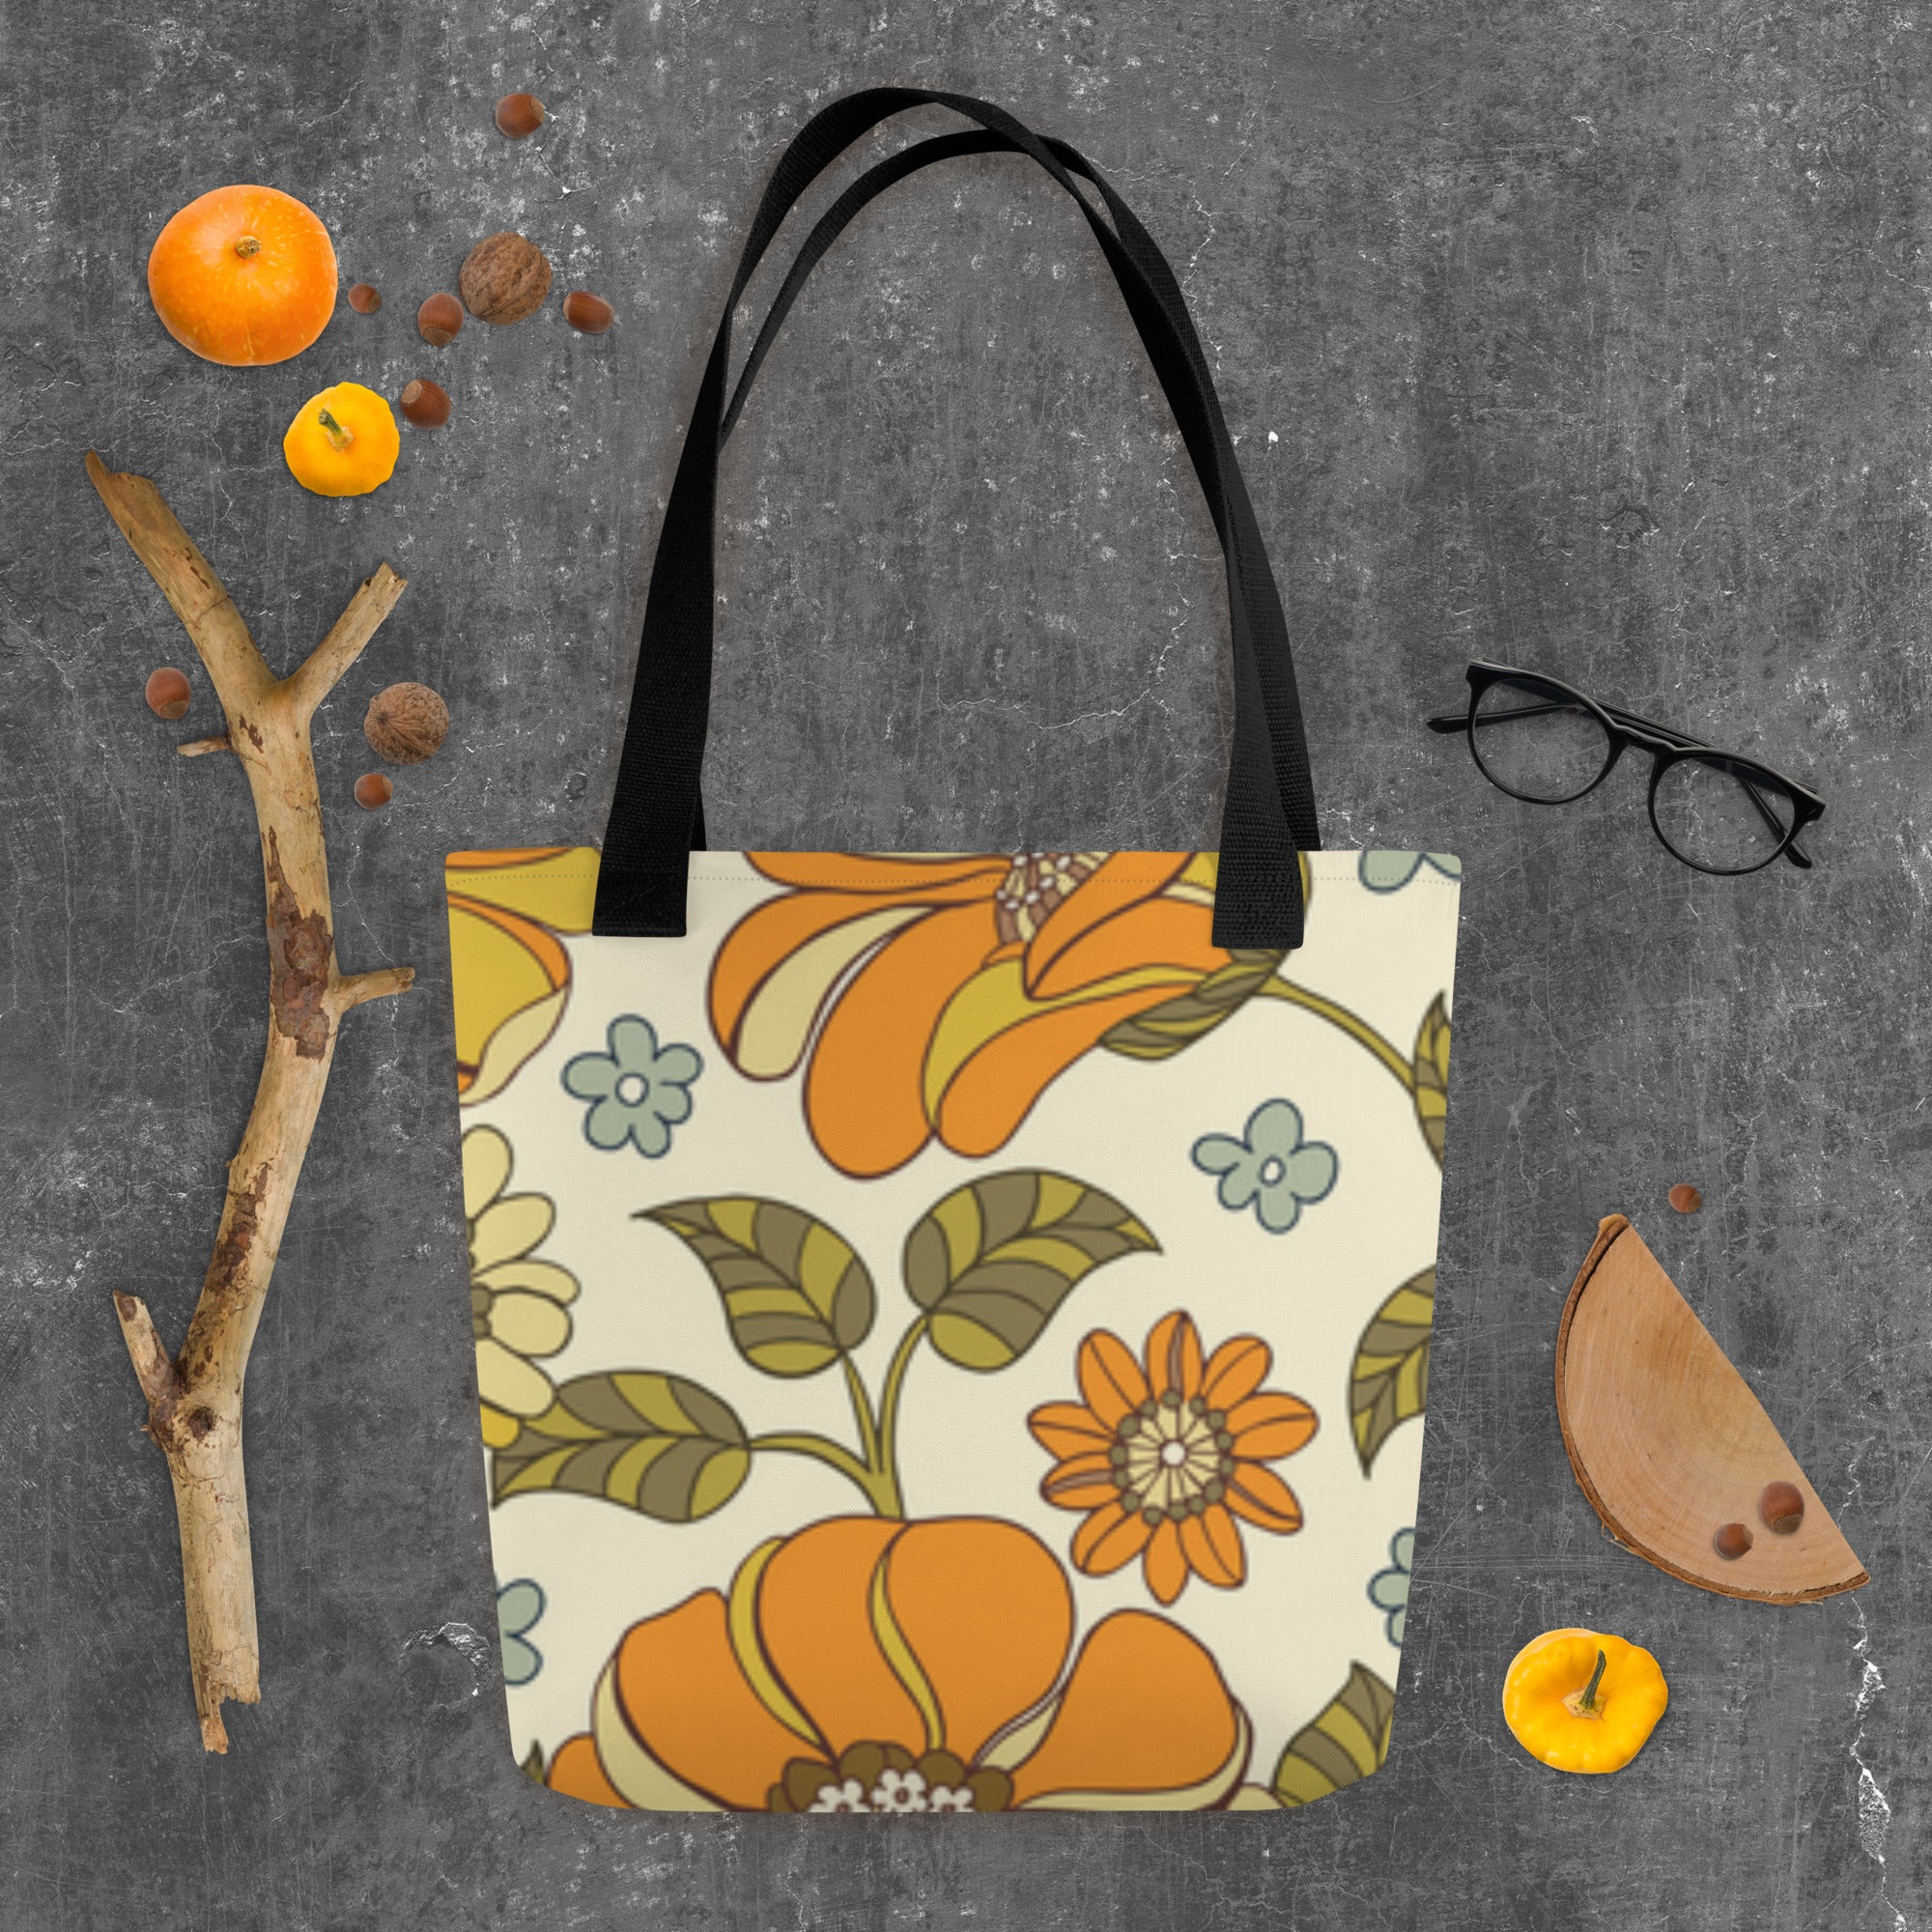 "Whimsical Wonders: Playful Patterns Tote – Carry Joy Everywhere!"